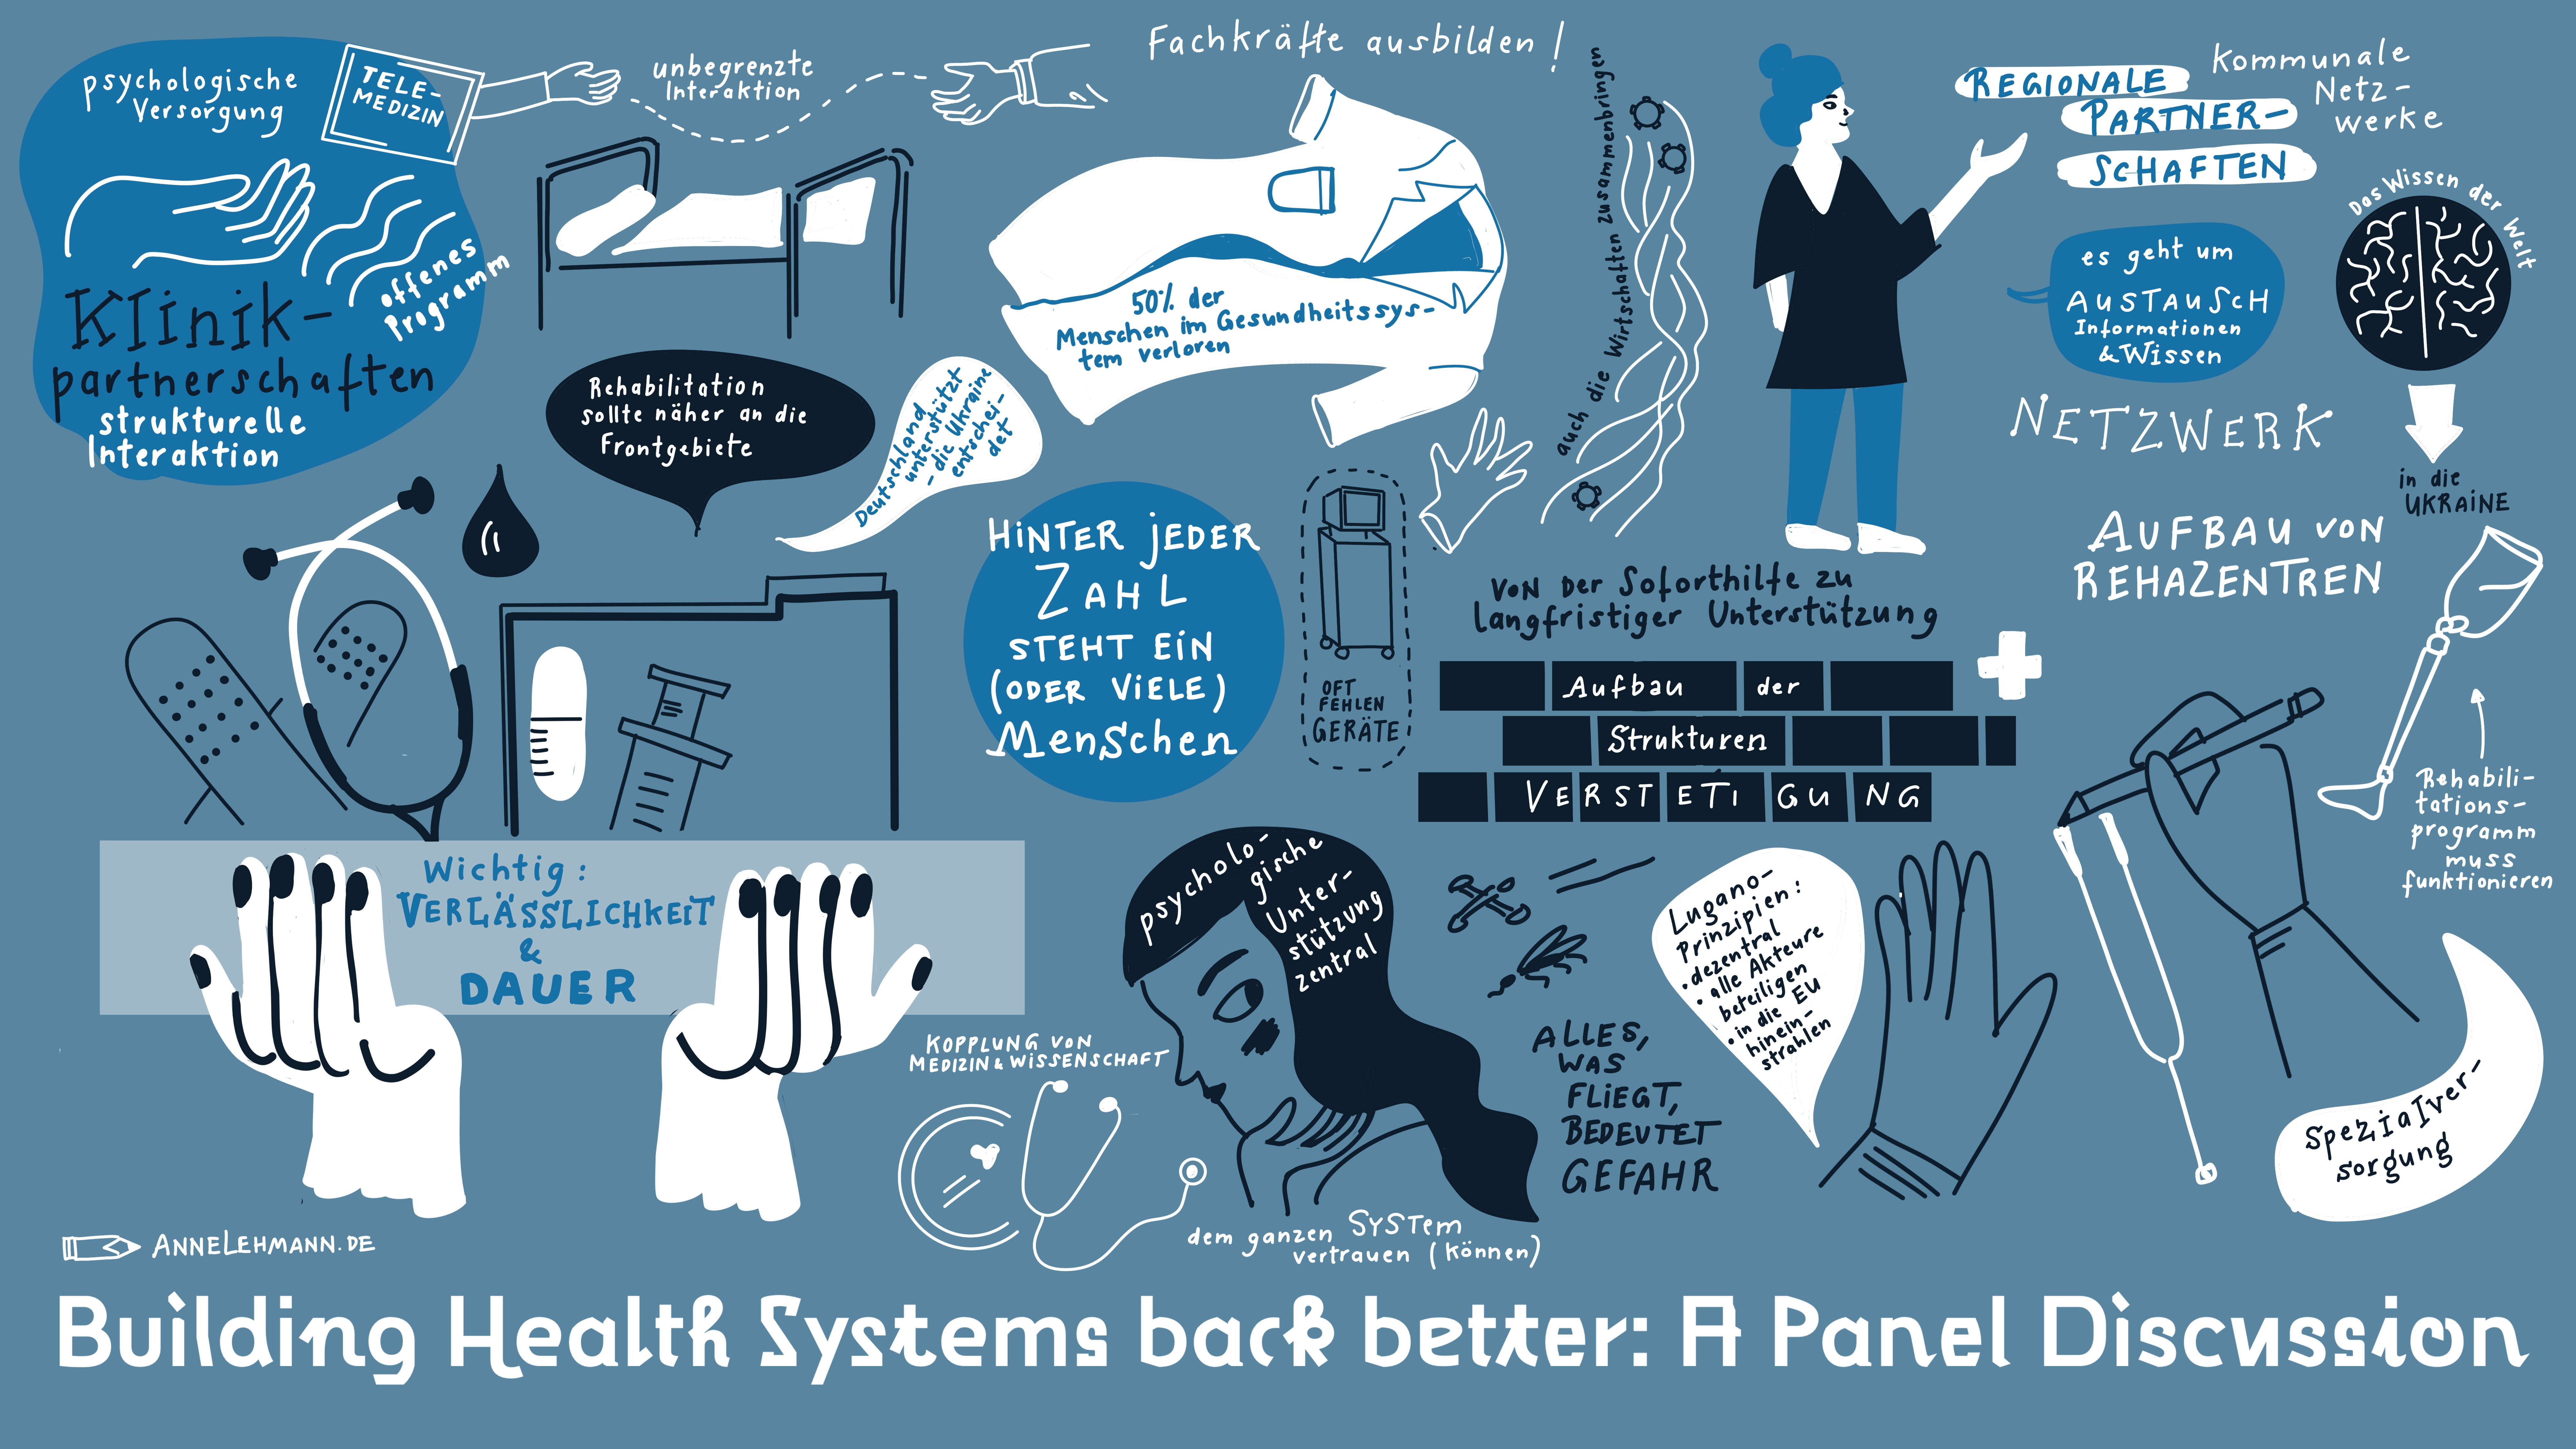 Diskussion zum Thema „Building Health Systems Back Better“